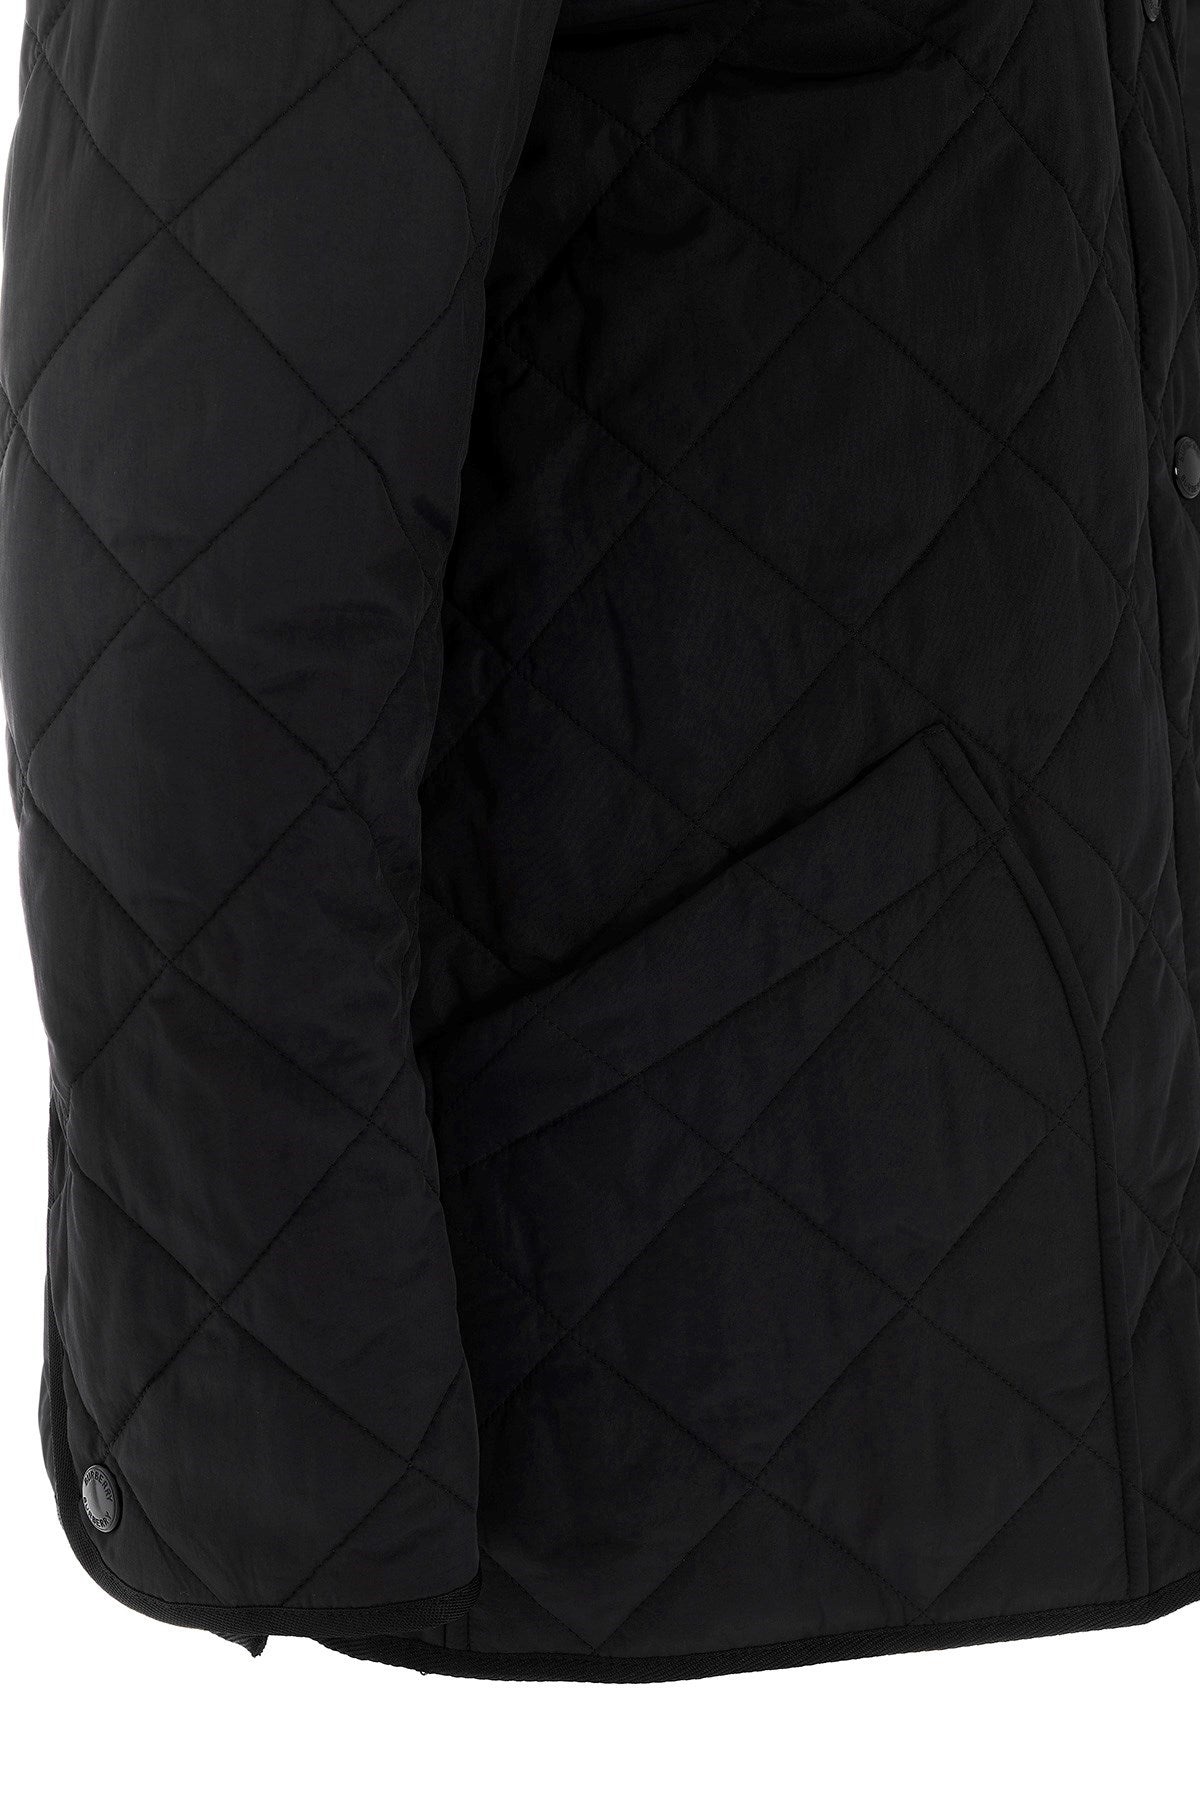 Burberry Women Quilted Jacket 'Cotswold' - 4